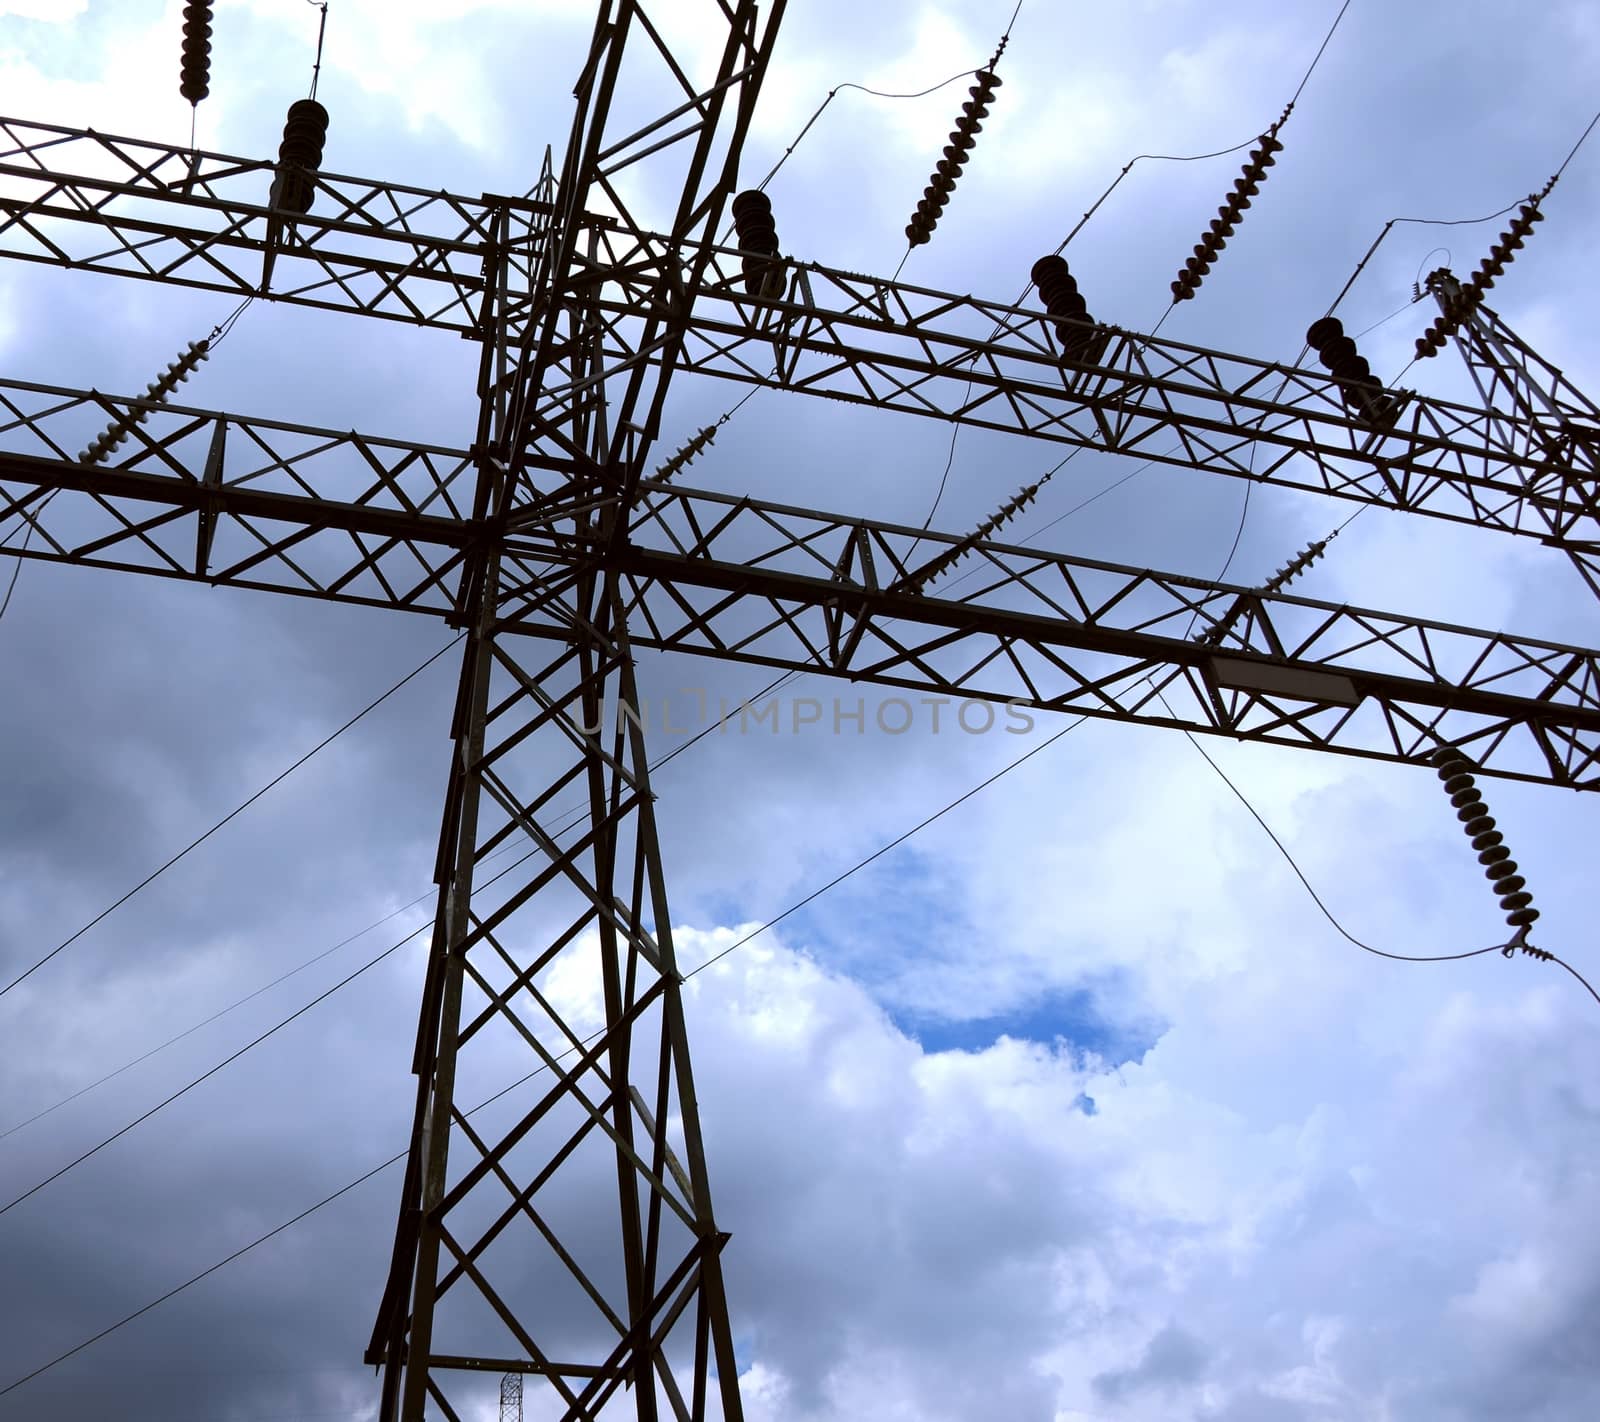 A large electricity pylon with ceramic insulators seen against a dramatic sky
